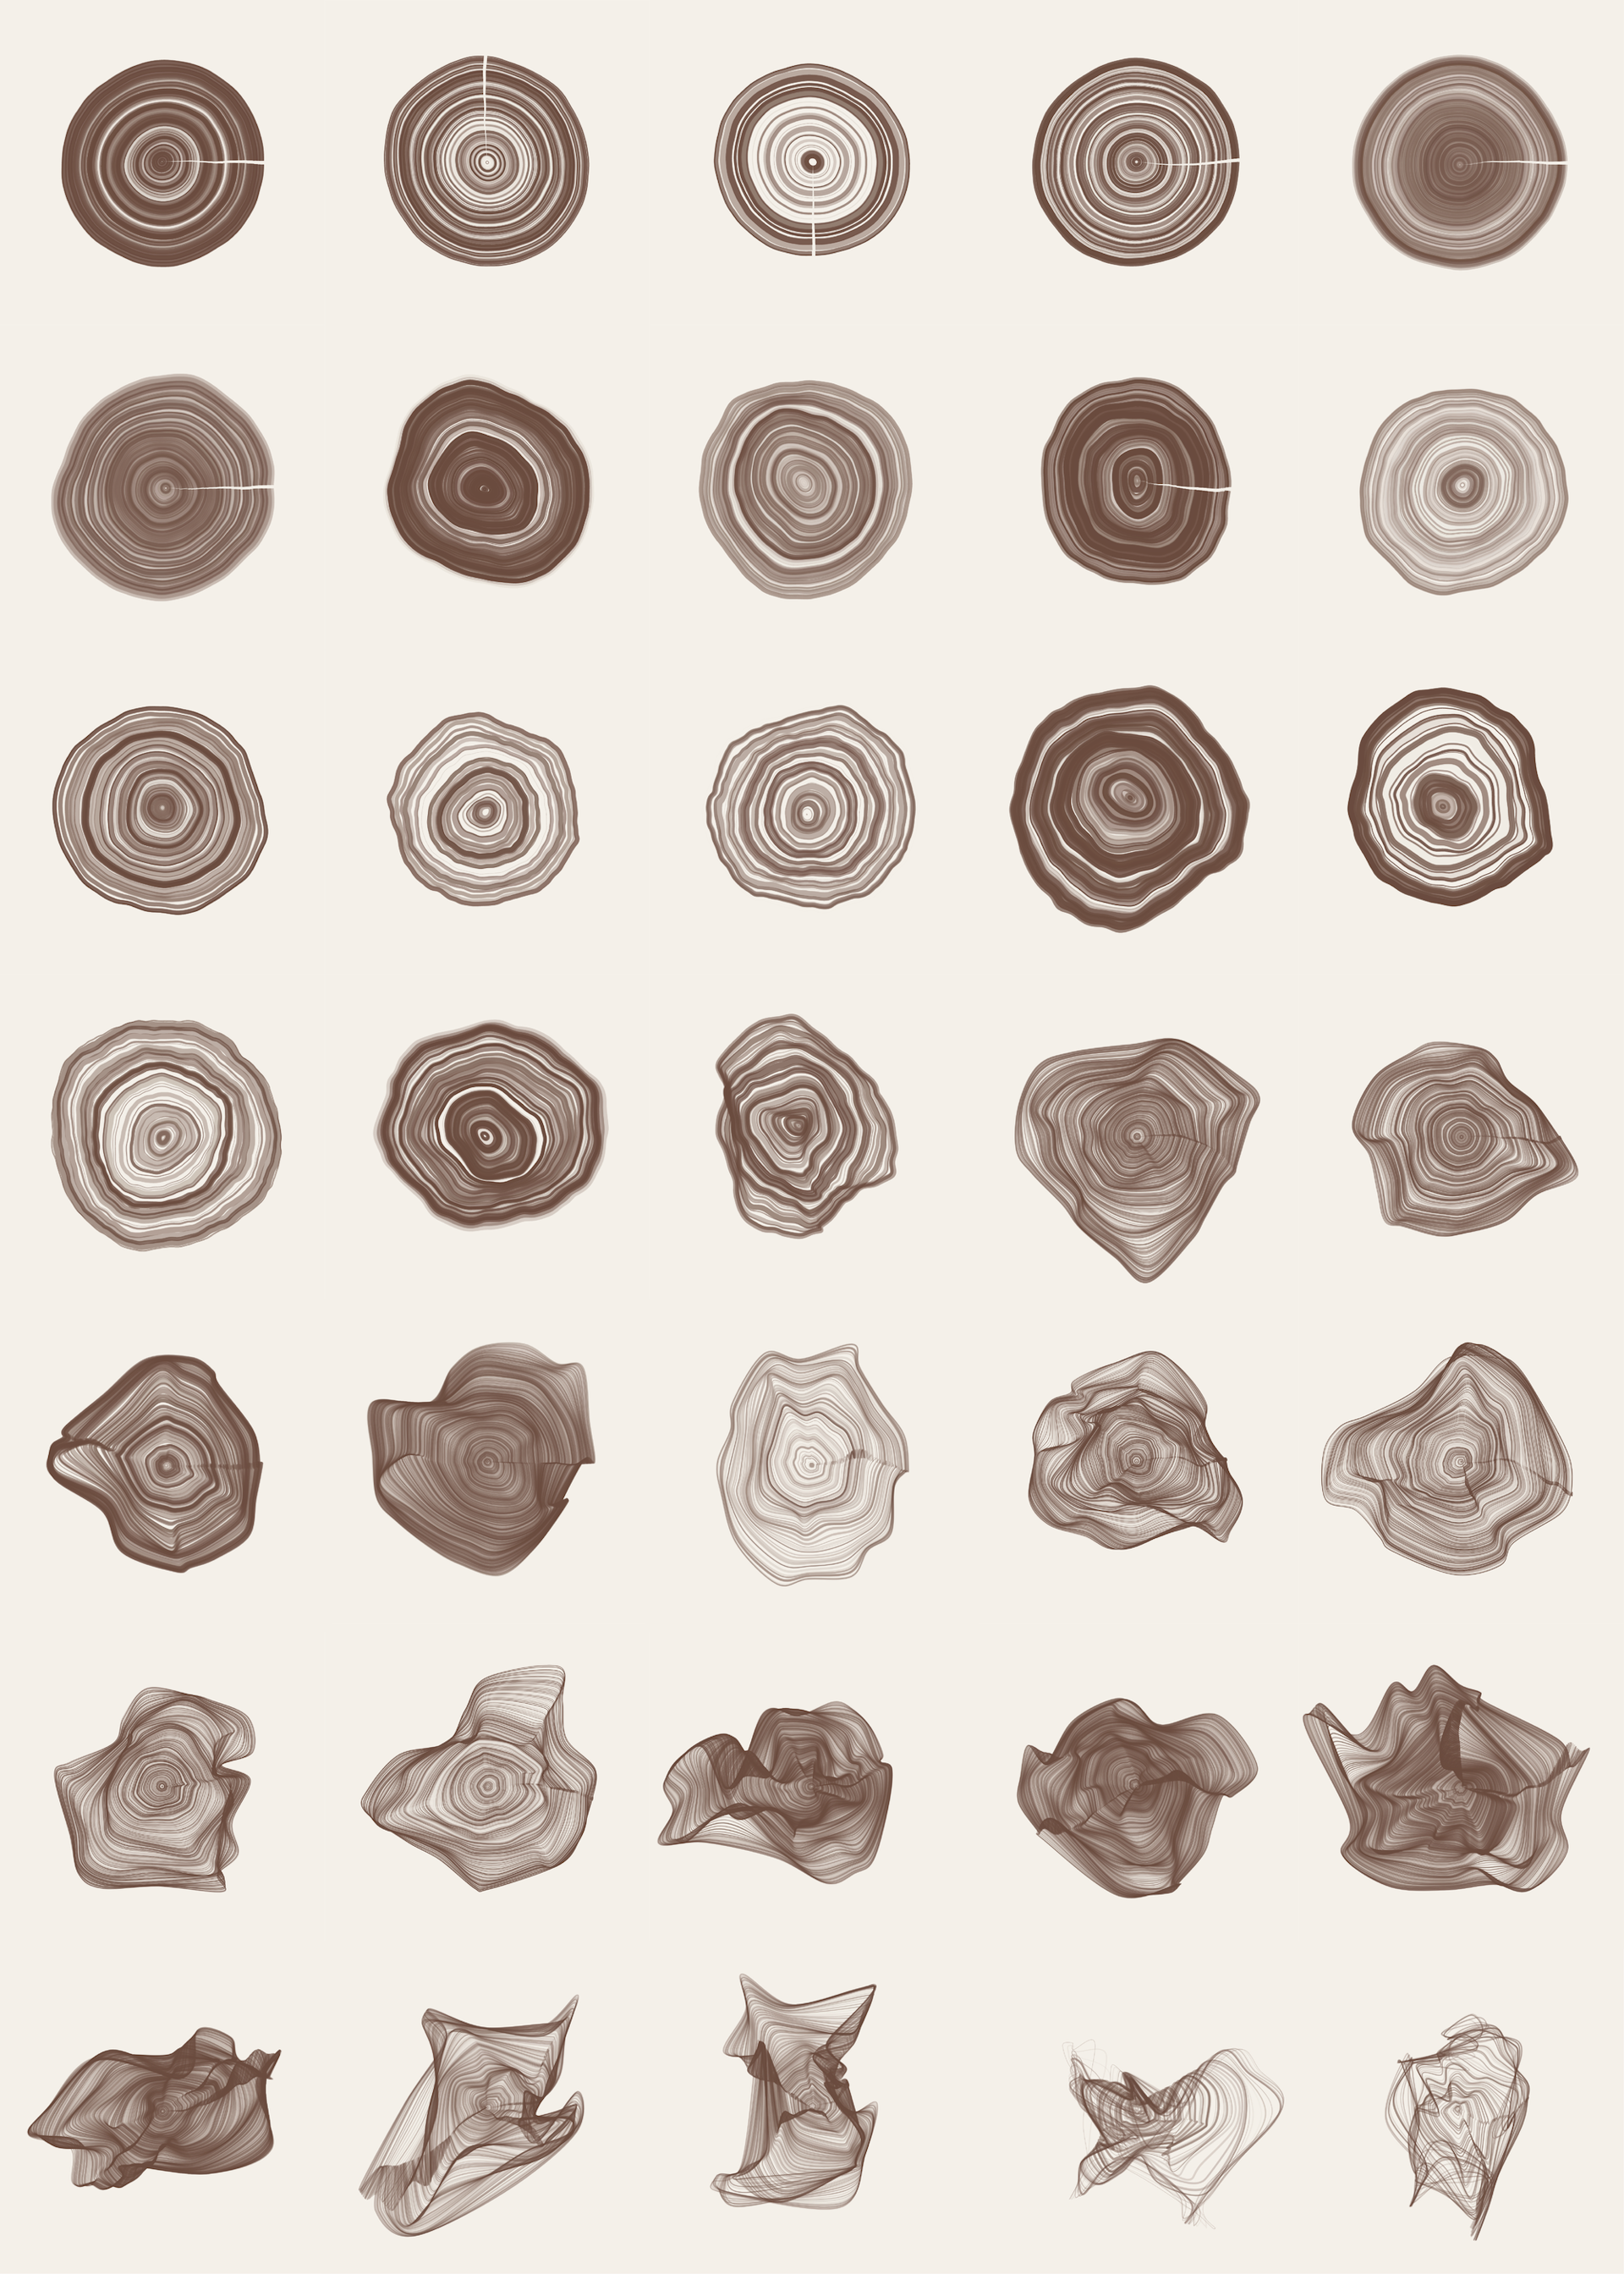 A grid of digitally rendered cross sections of trees in brown and sepia tones